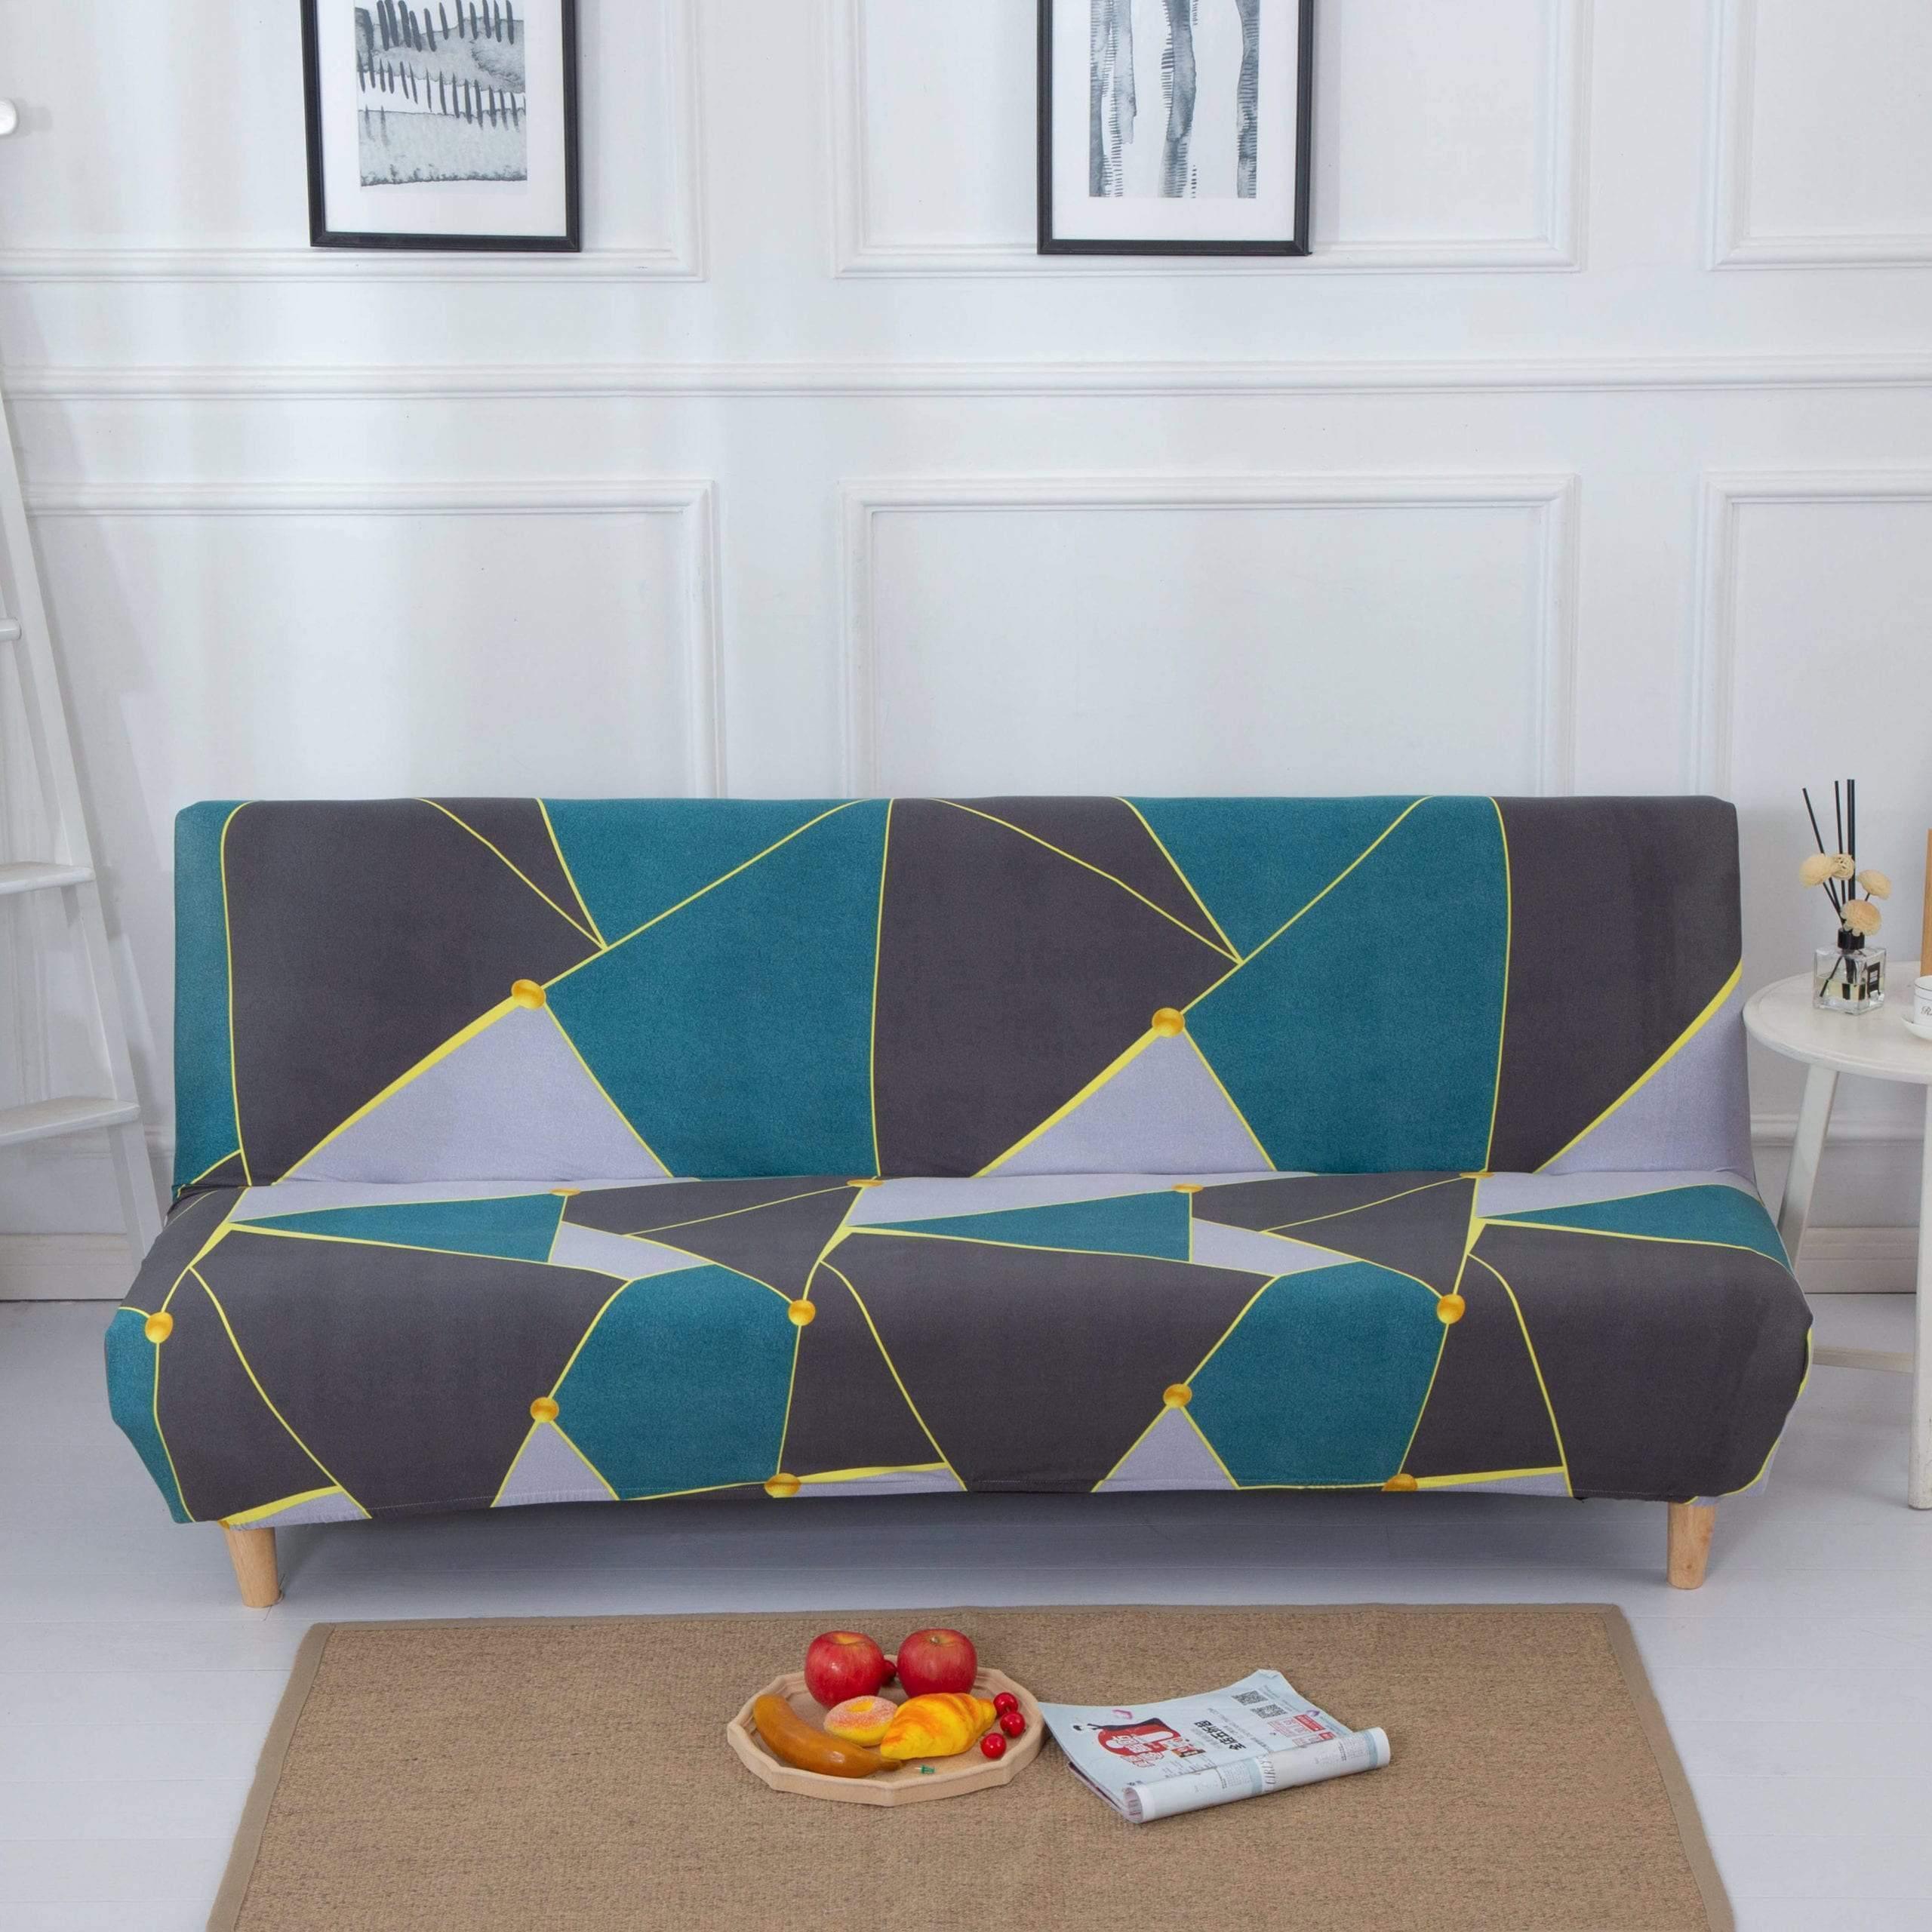 Sofa Bed Cover - Stuoia - Adaptable & Expandable - The Sofa Cover Crafter